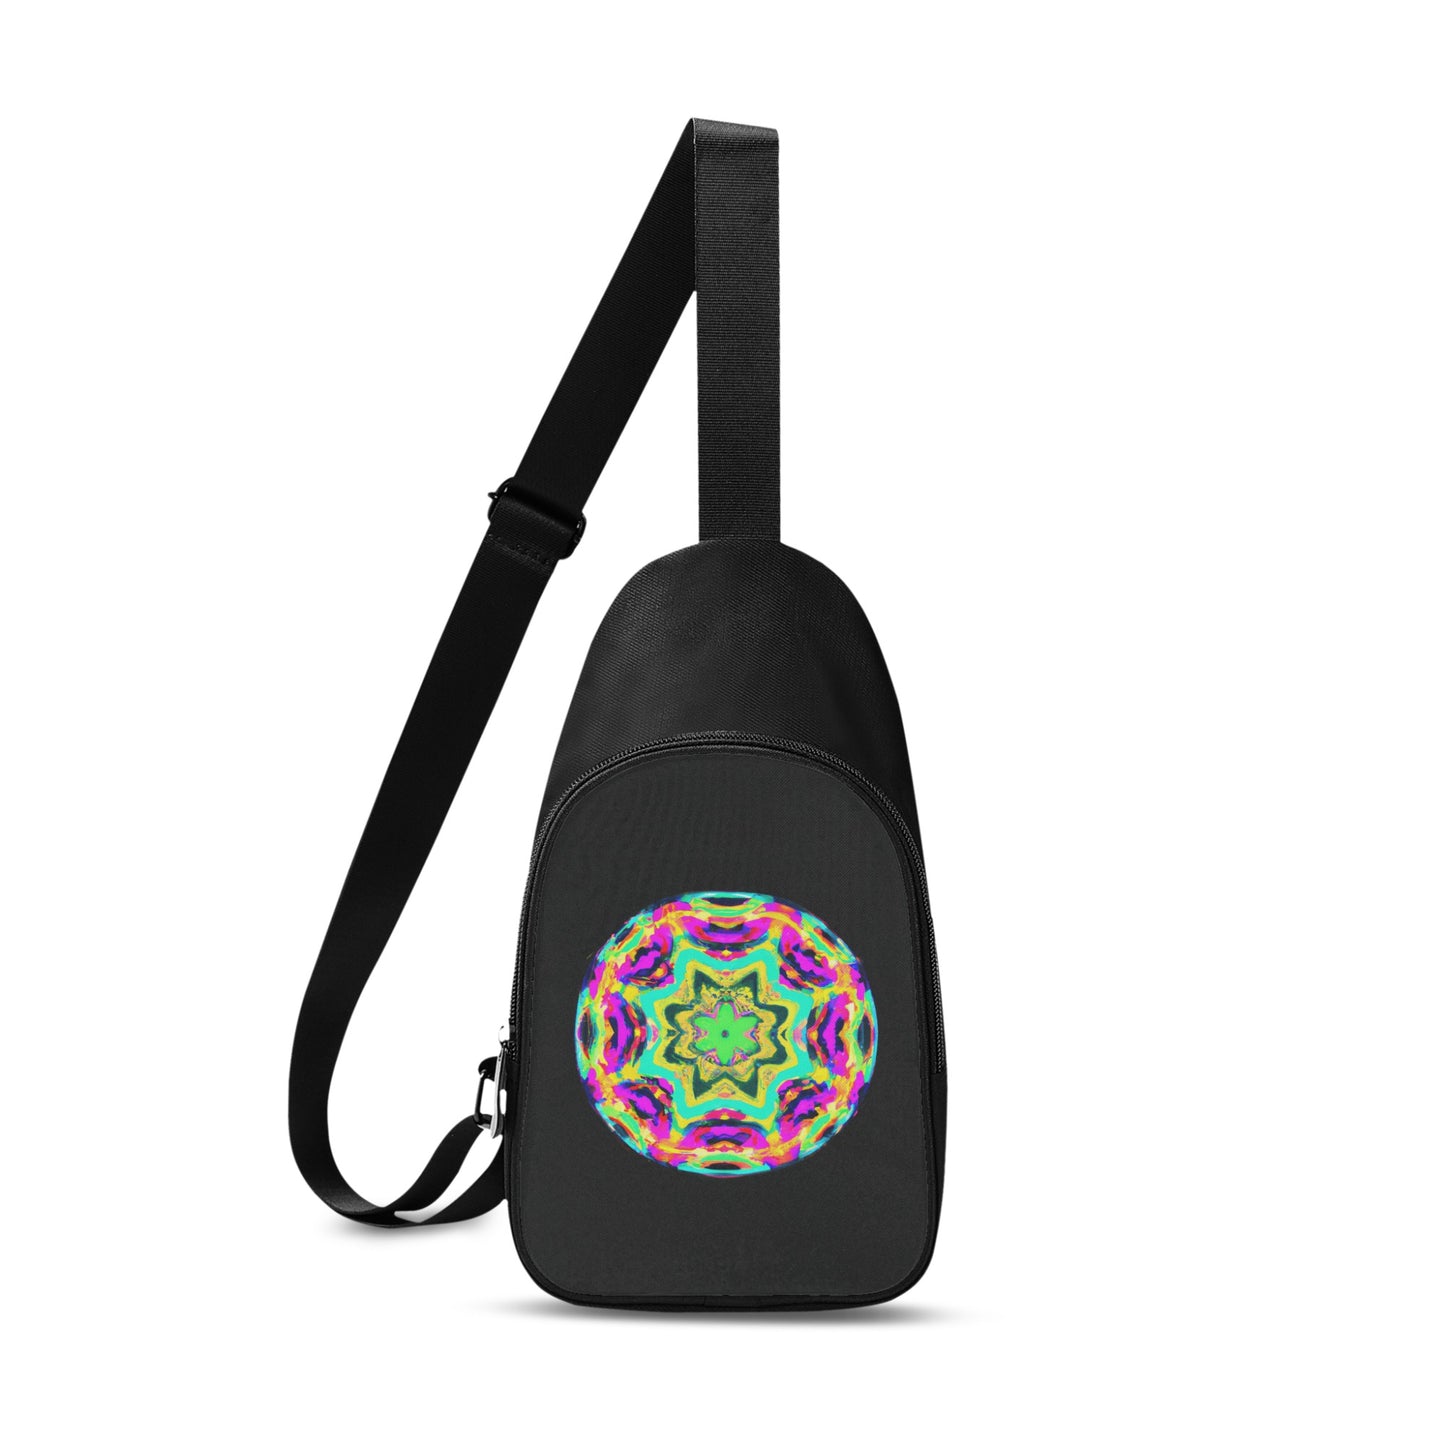 Need an interesting cross body bag to add to the collection, this could be the one bag for you.  The Psychedelia Amnesia Chest bag is unisex with a printed design of the psychedelia amnesia pattern.  It's bold and it's bright.